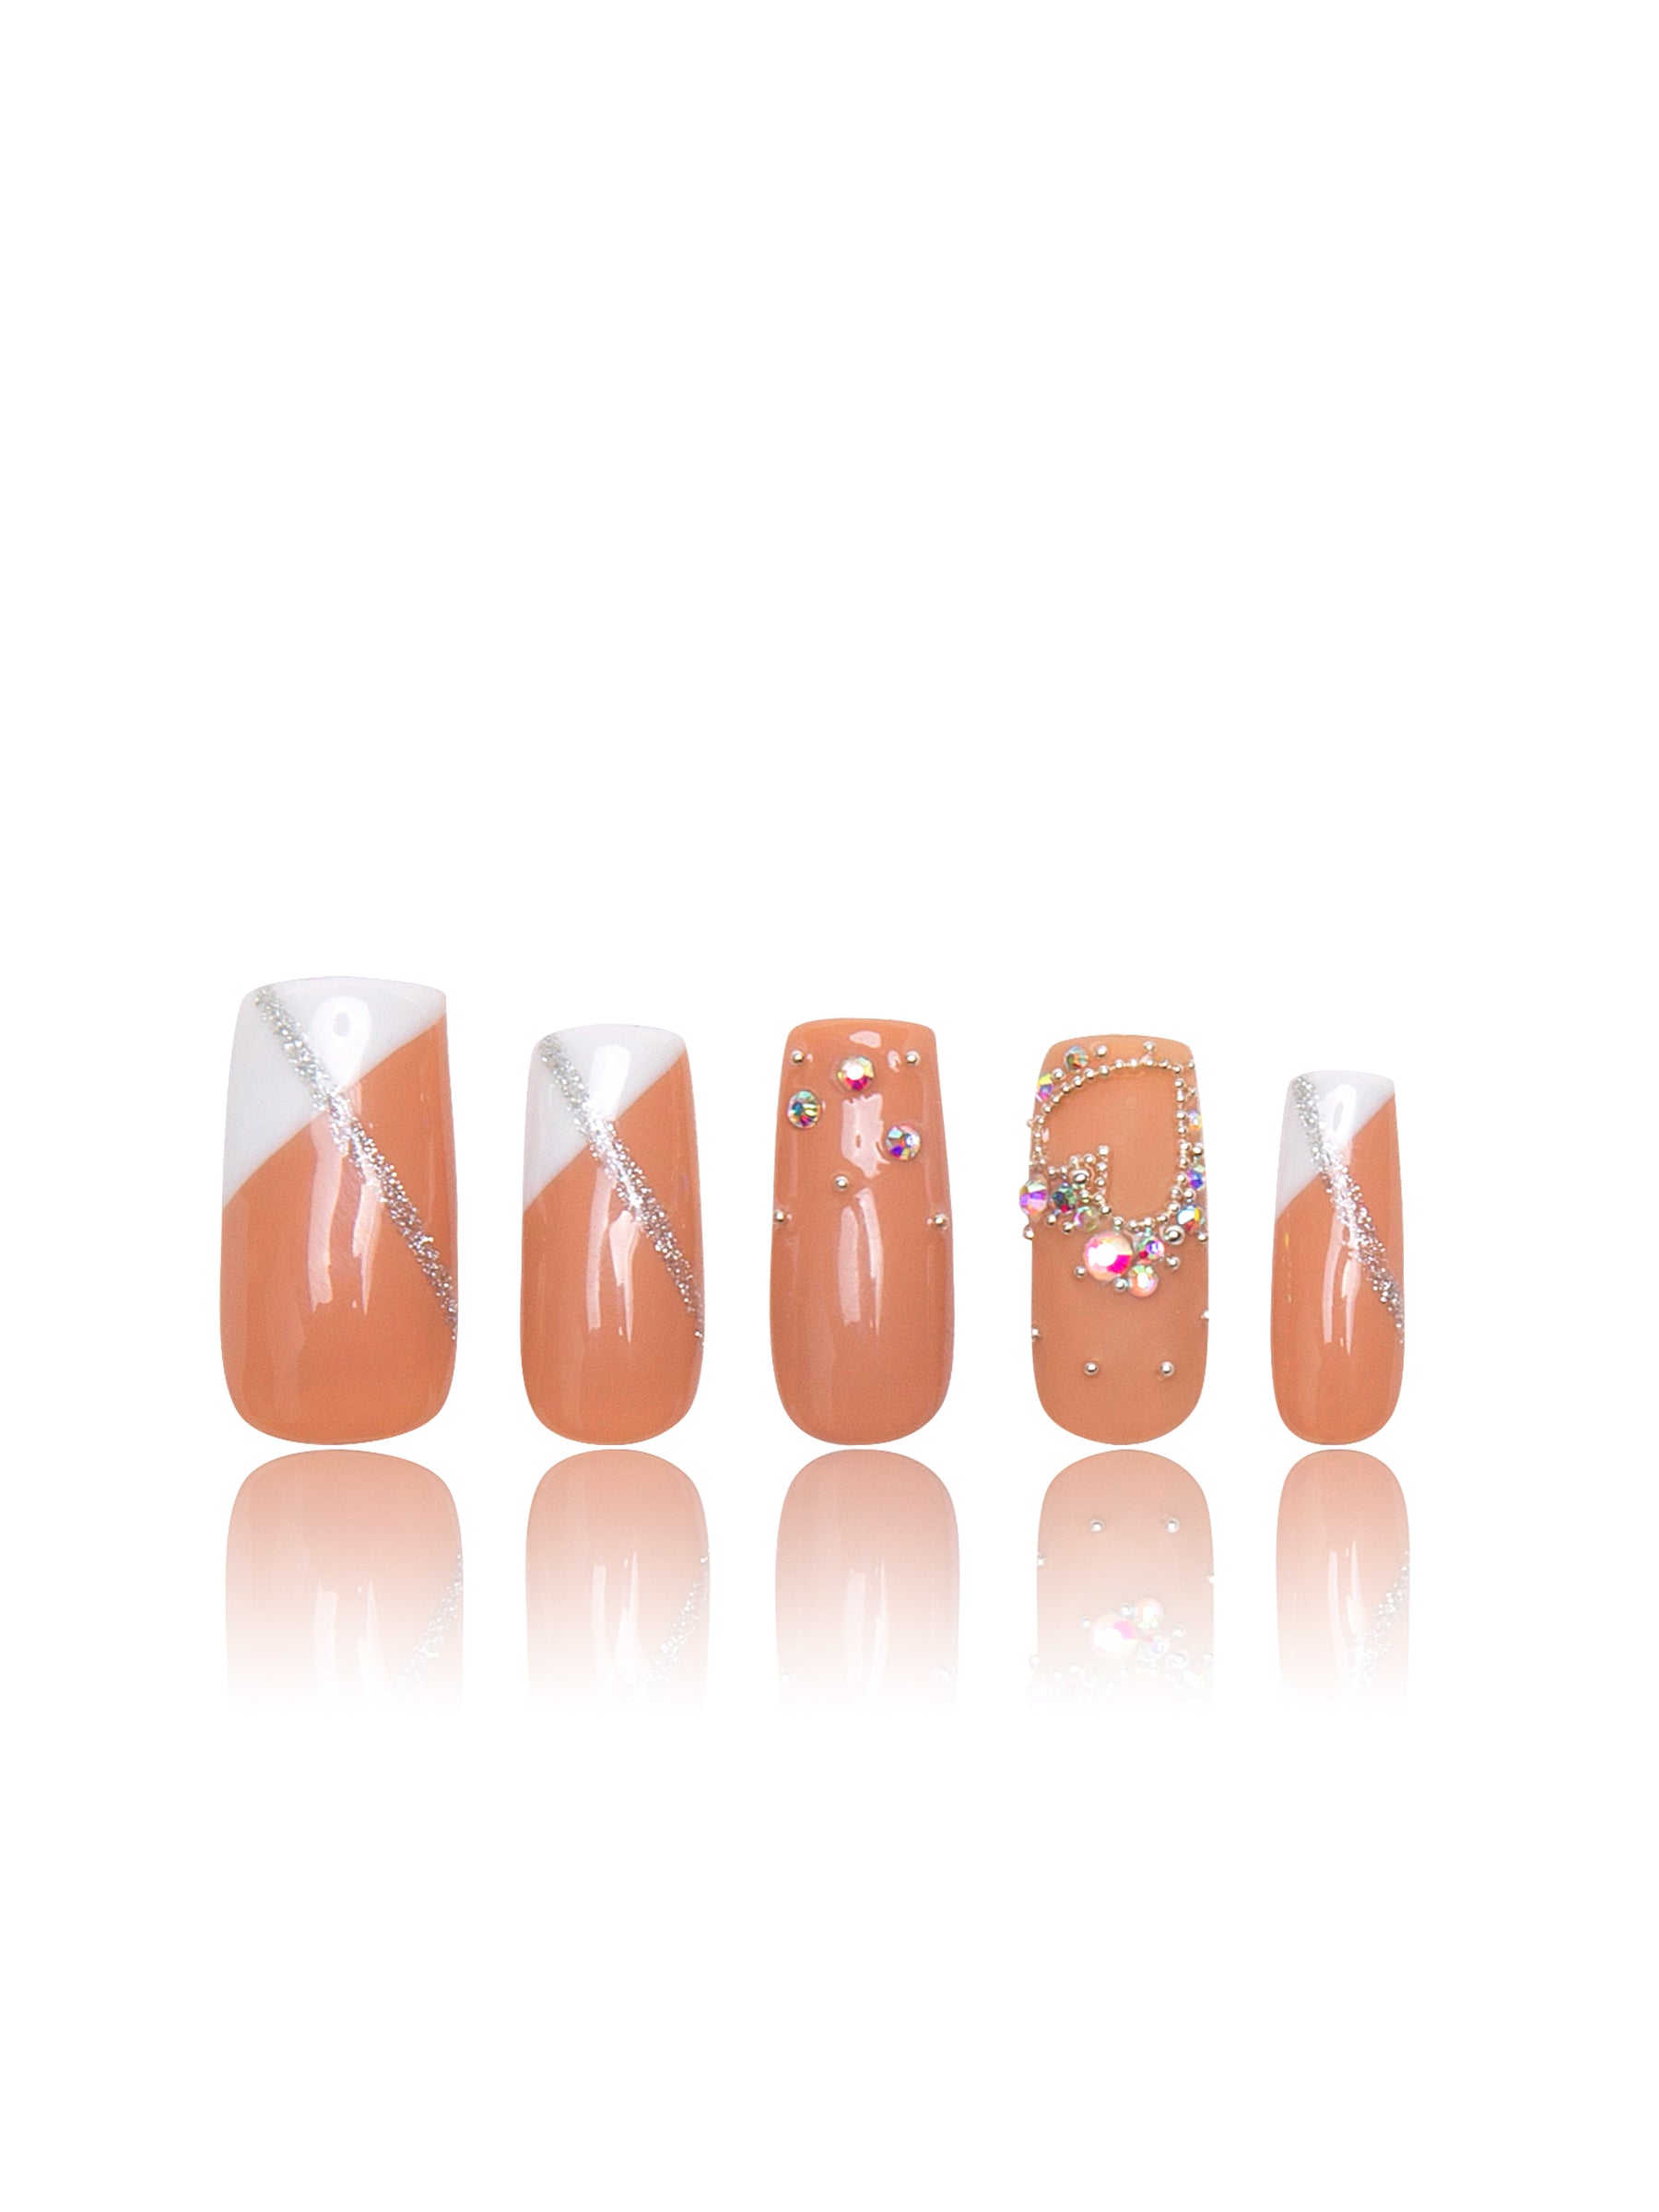 Set of five 'Lovely Kitten Heels' press-on nails by Lovful featuring diagonal glitter stripes and classic French tips on a white base with some nails adorned with gemstones.